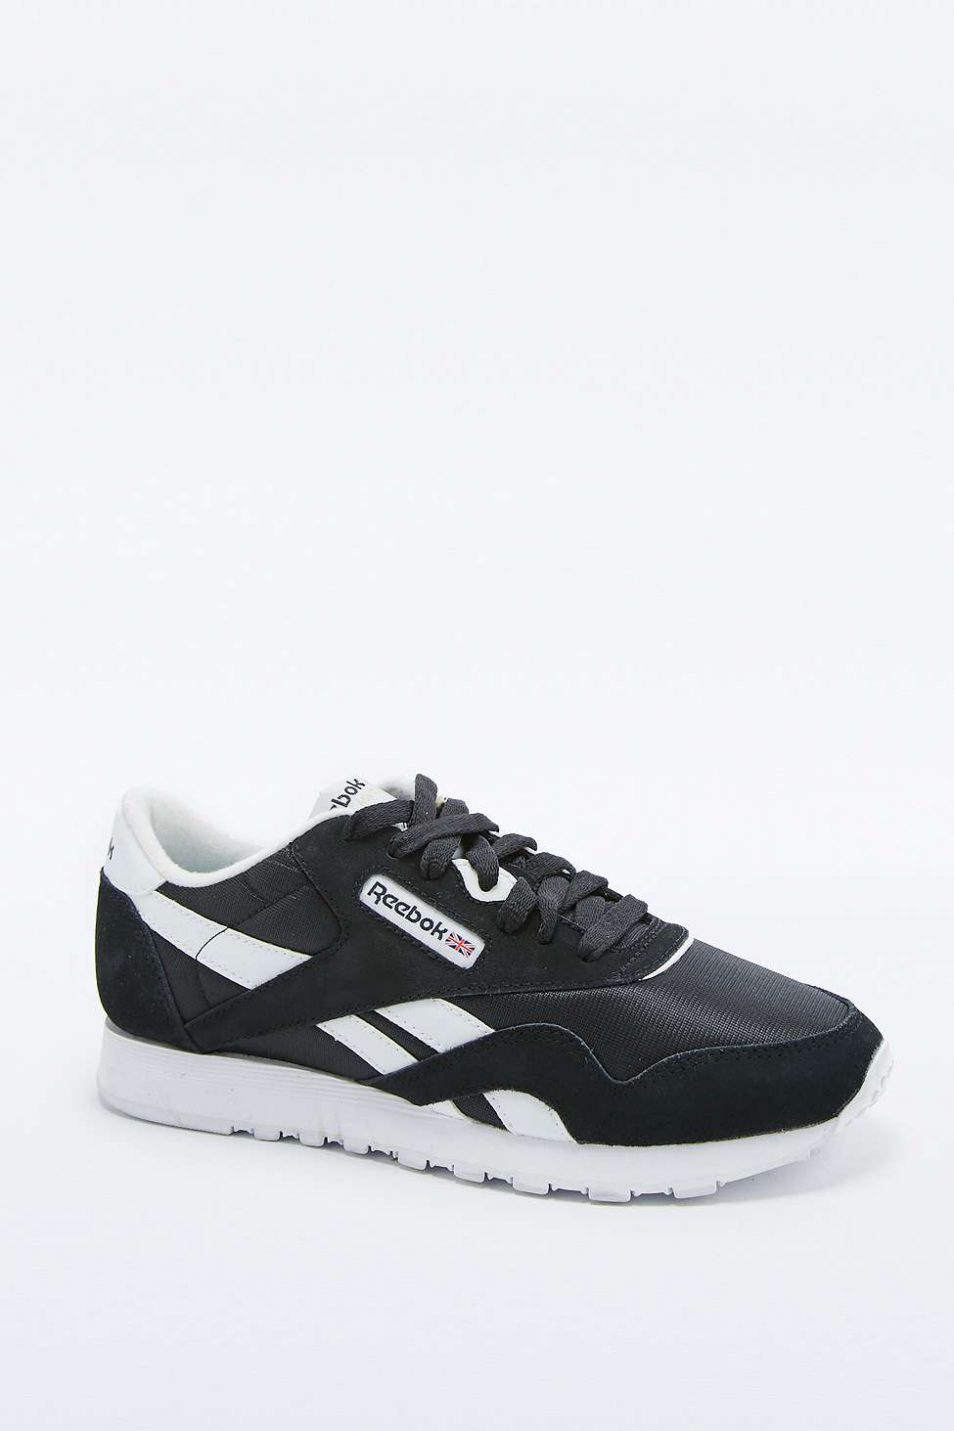 Reebok Classic Black and White Trainers 1